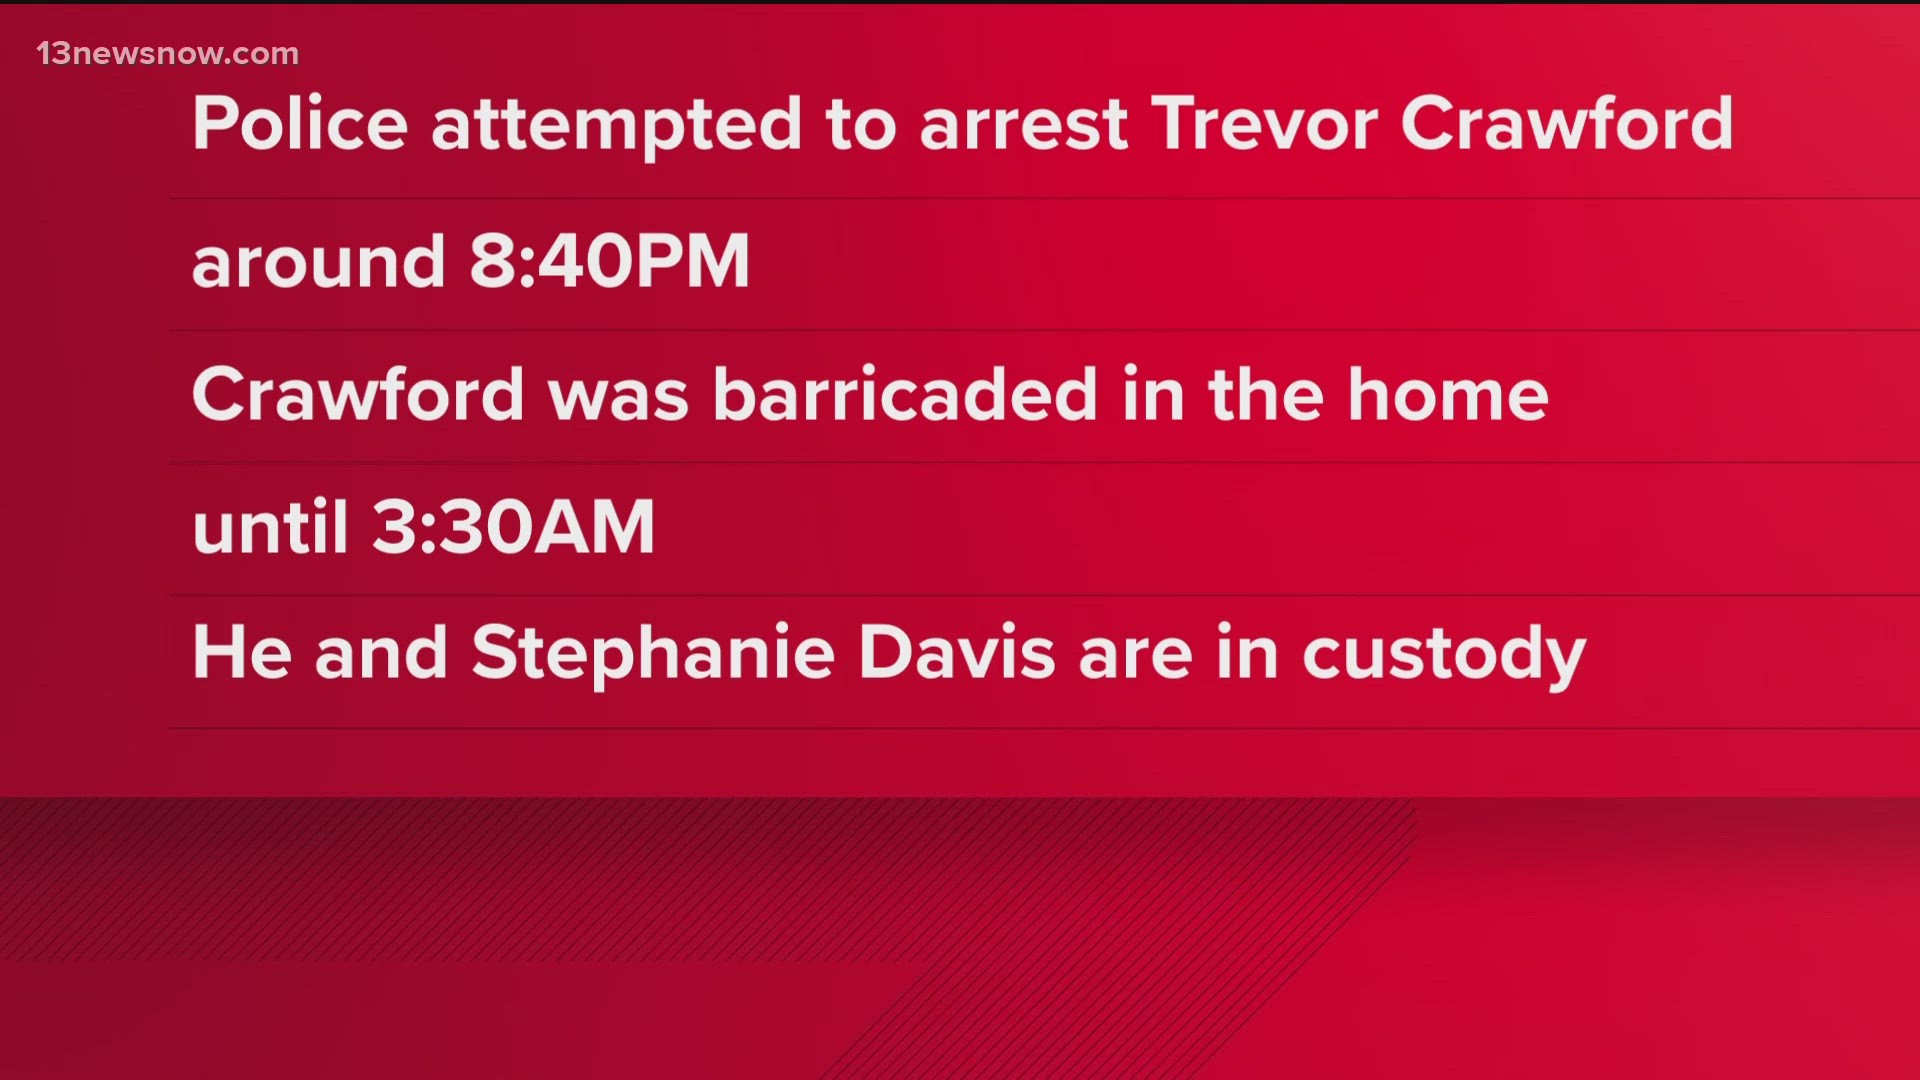 Police claim Trevor Crawford ignored their commands and showed a gun in his waistband, and threatened to shoot the officers.